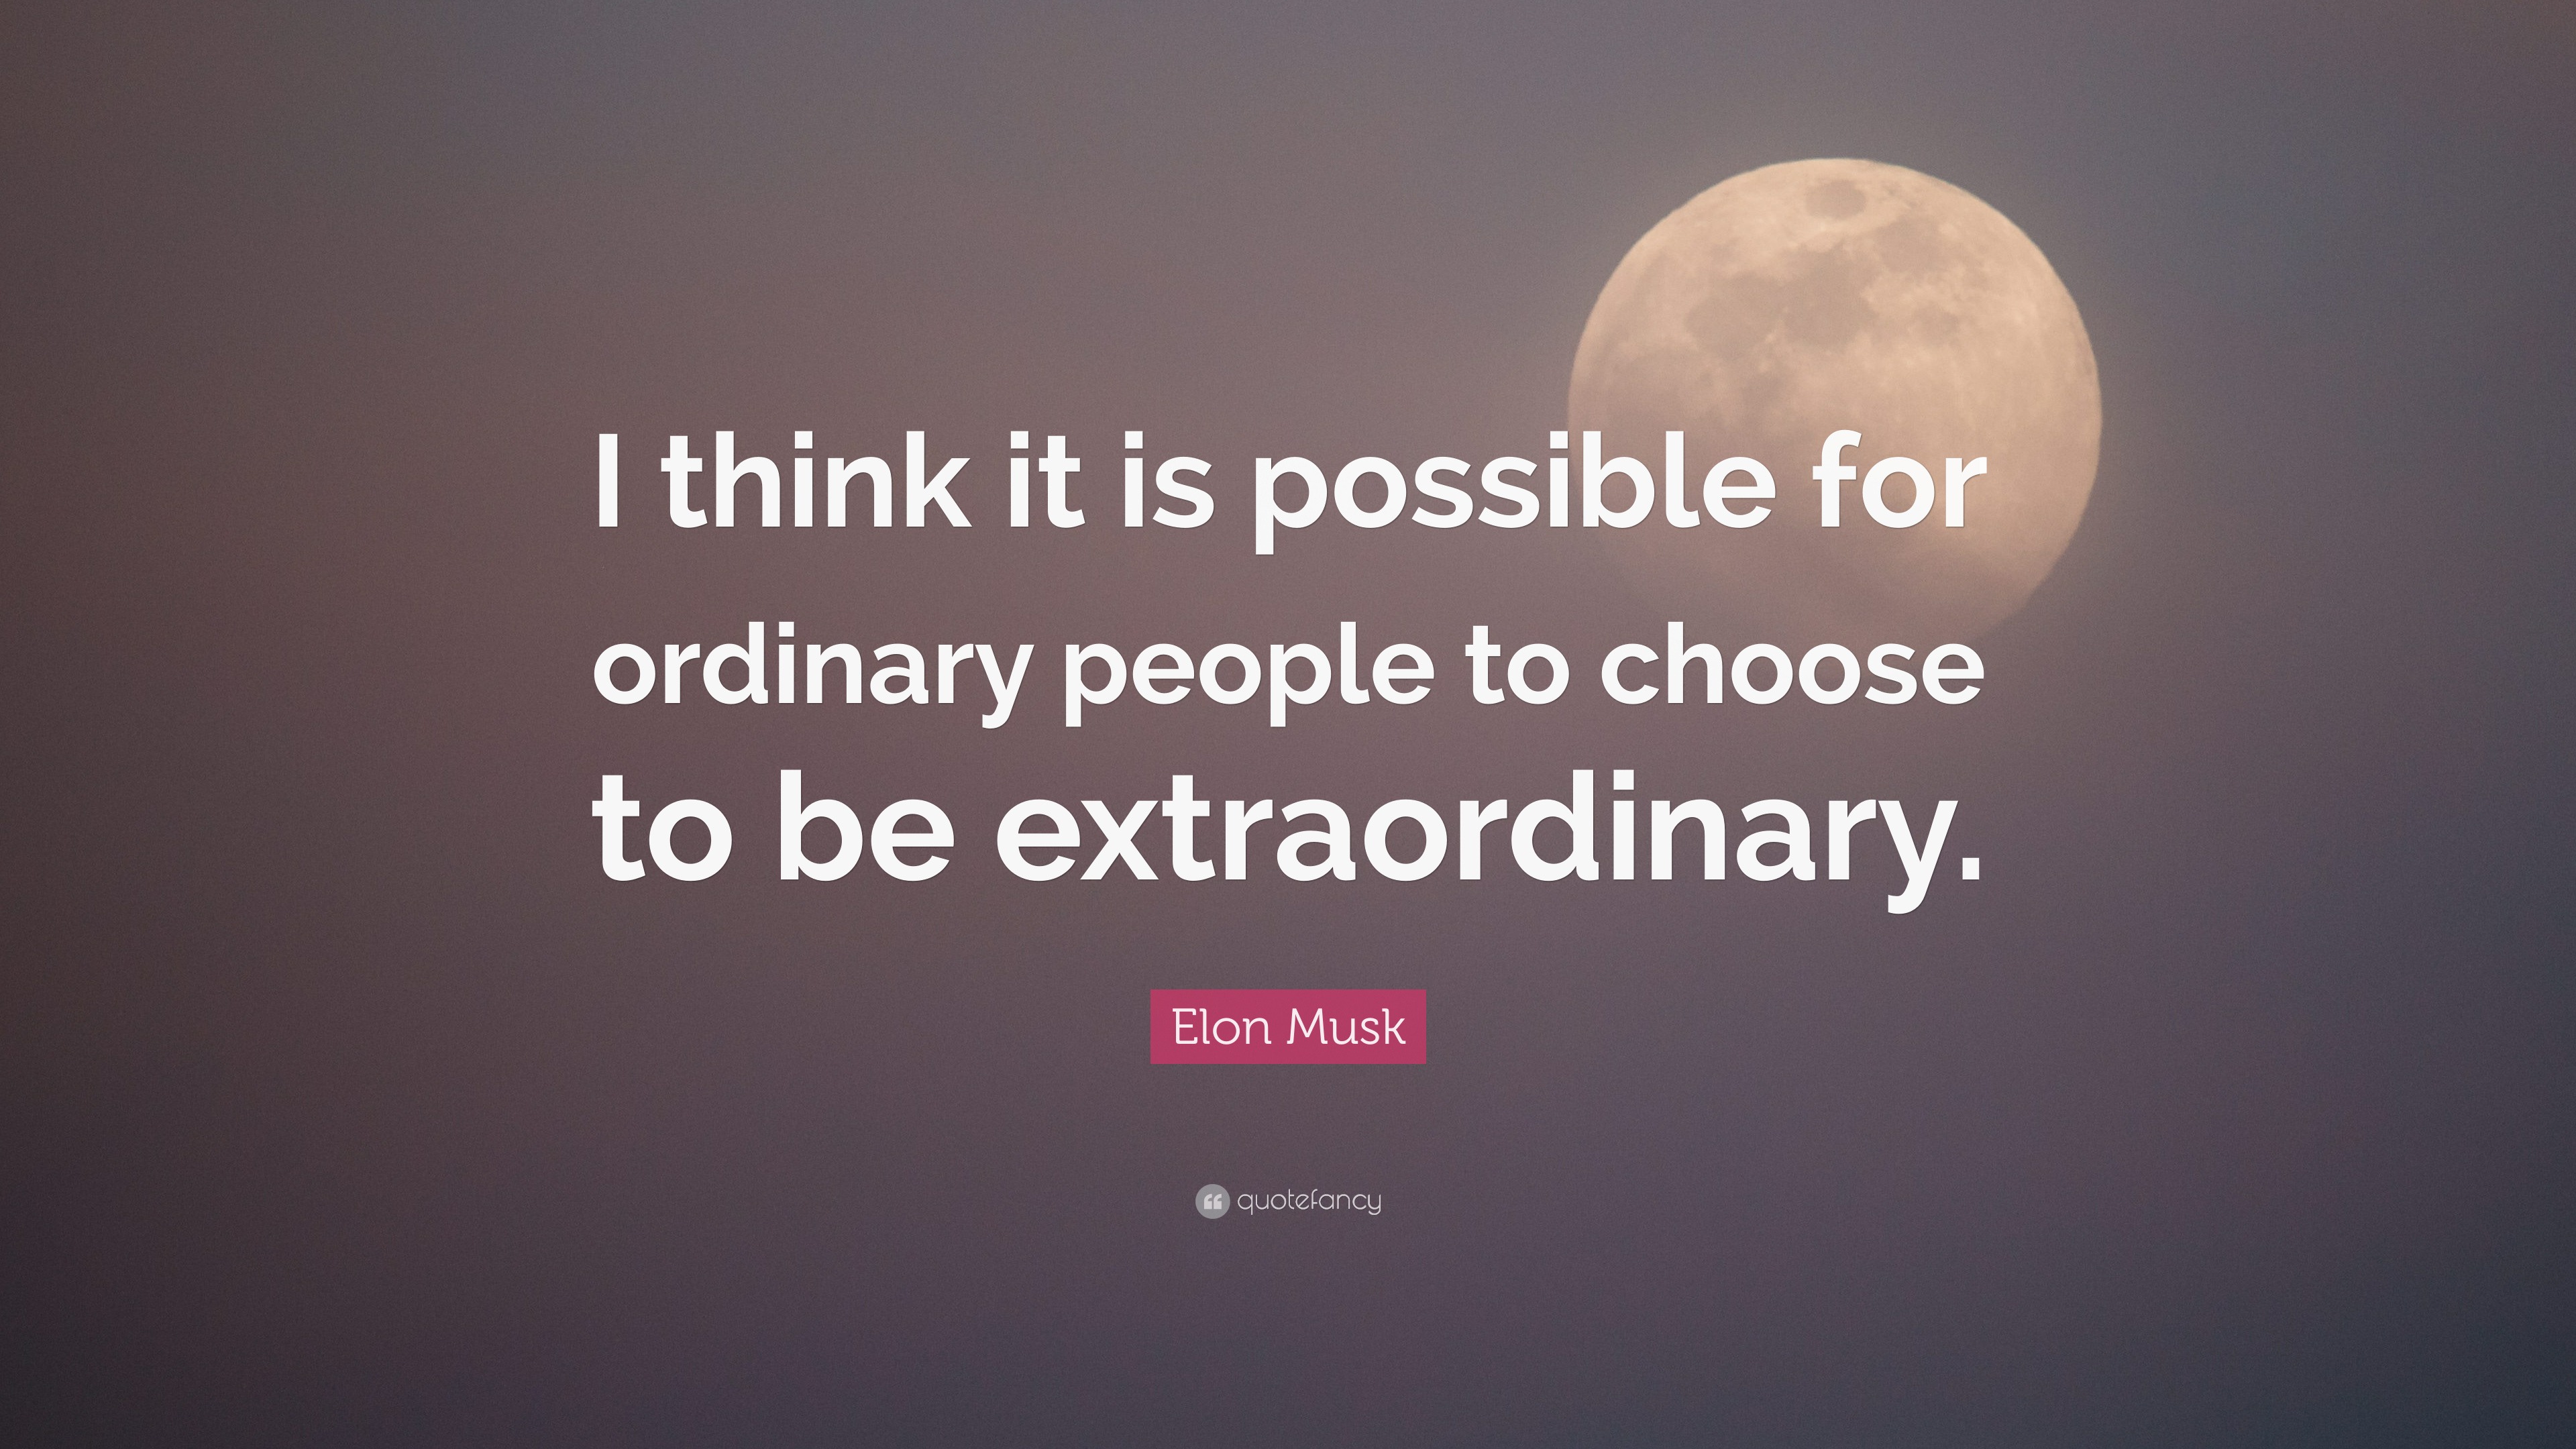 Elon Musk Quote: “I think it is possible for ordinary people to choose ...